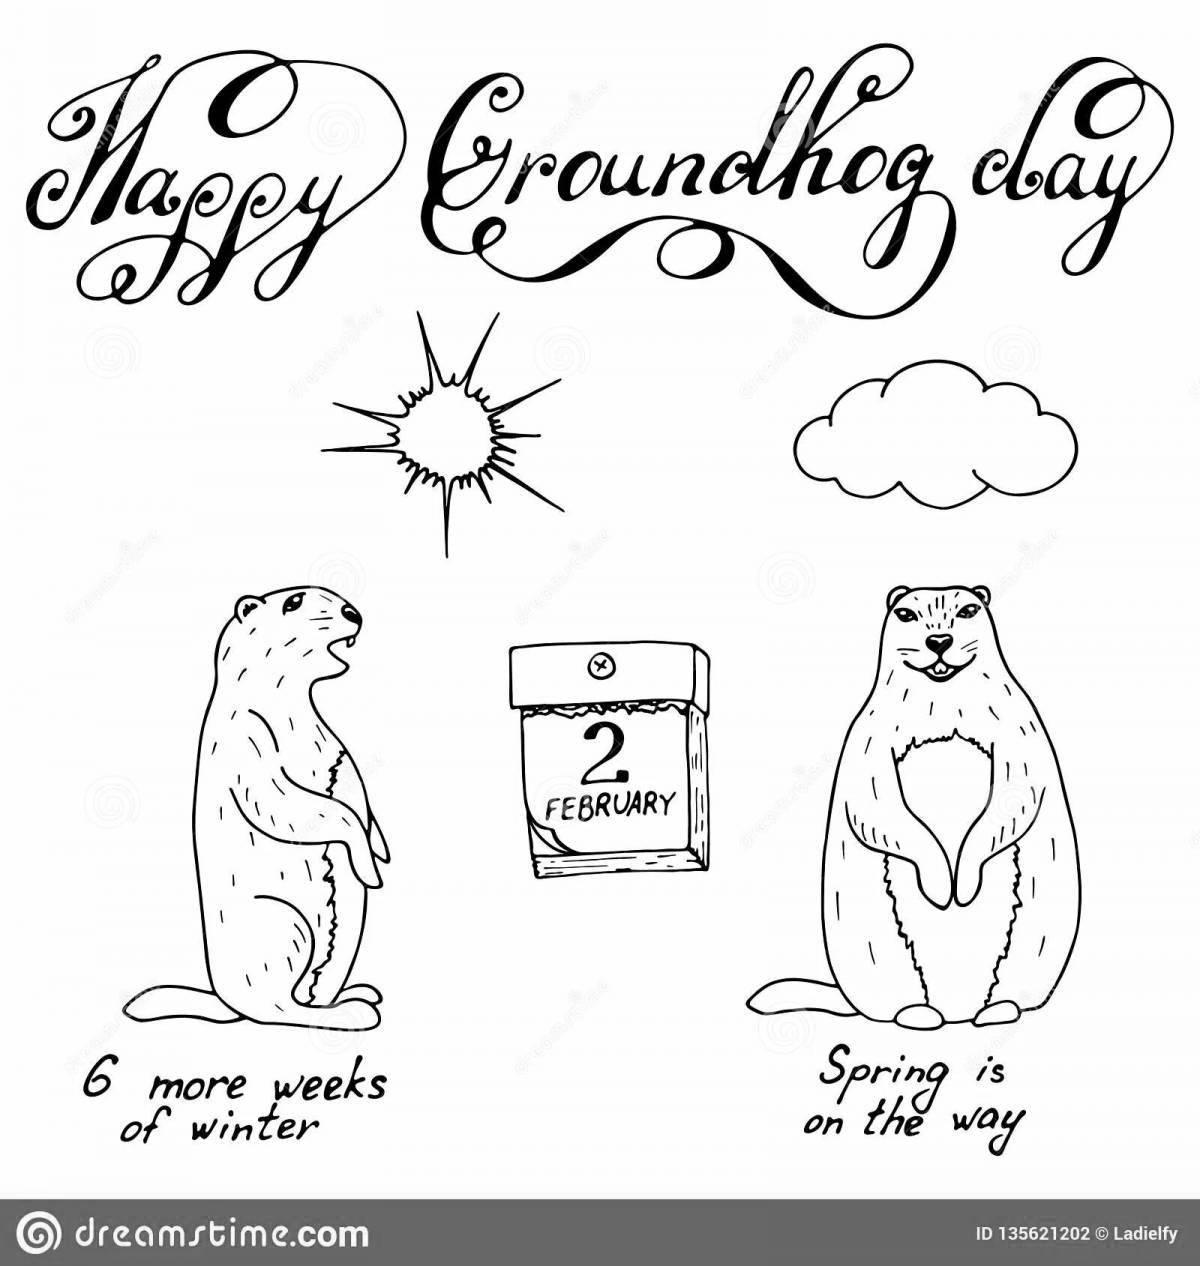 Cute groundhog day coloring page